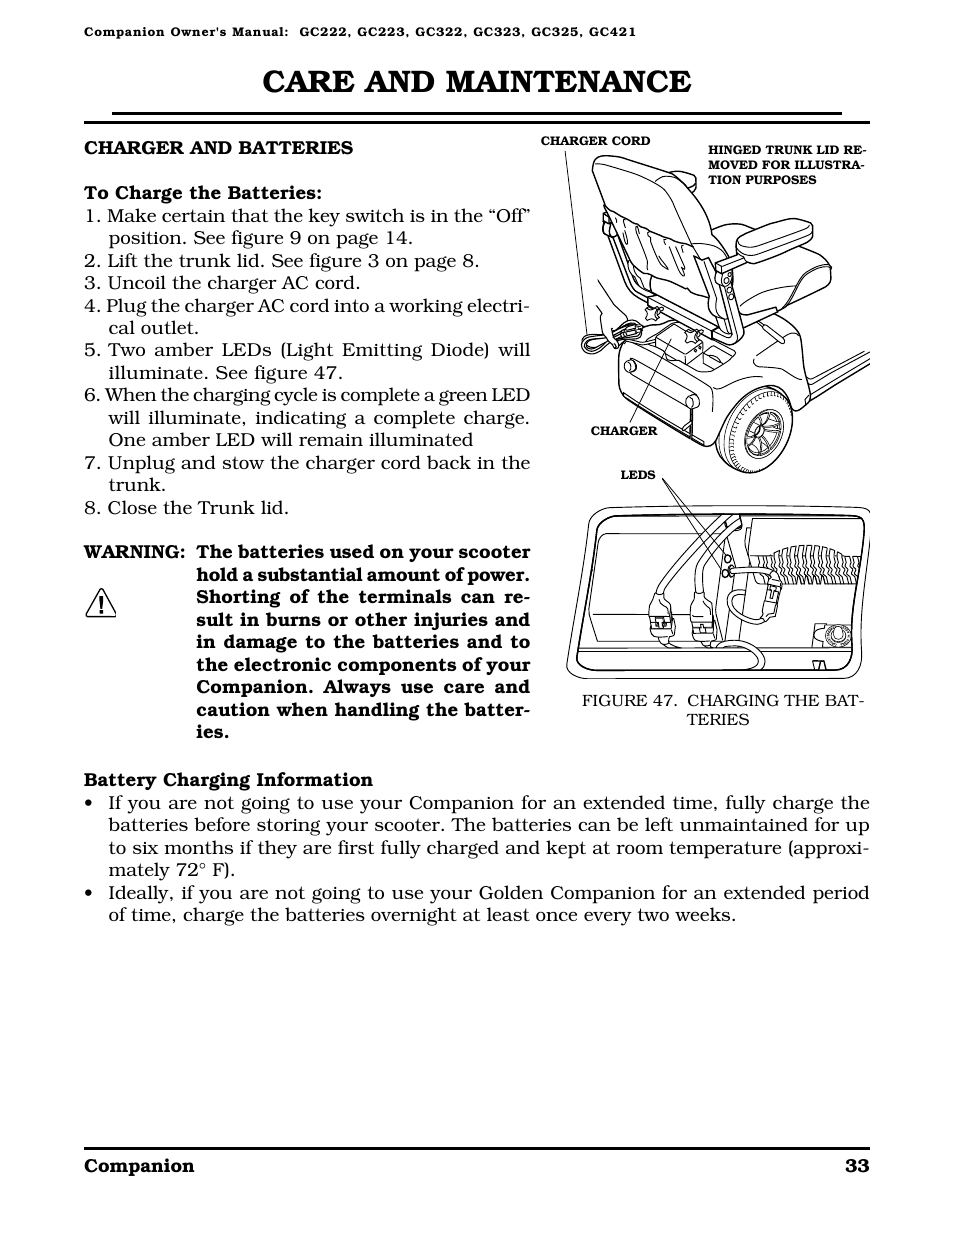 Care and maintenance | Golden Technologies Companion II User Manual | Page 35 / 41